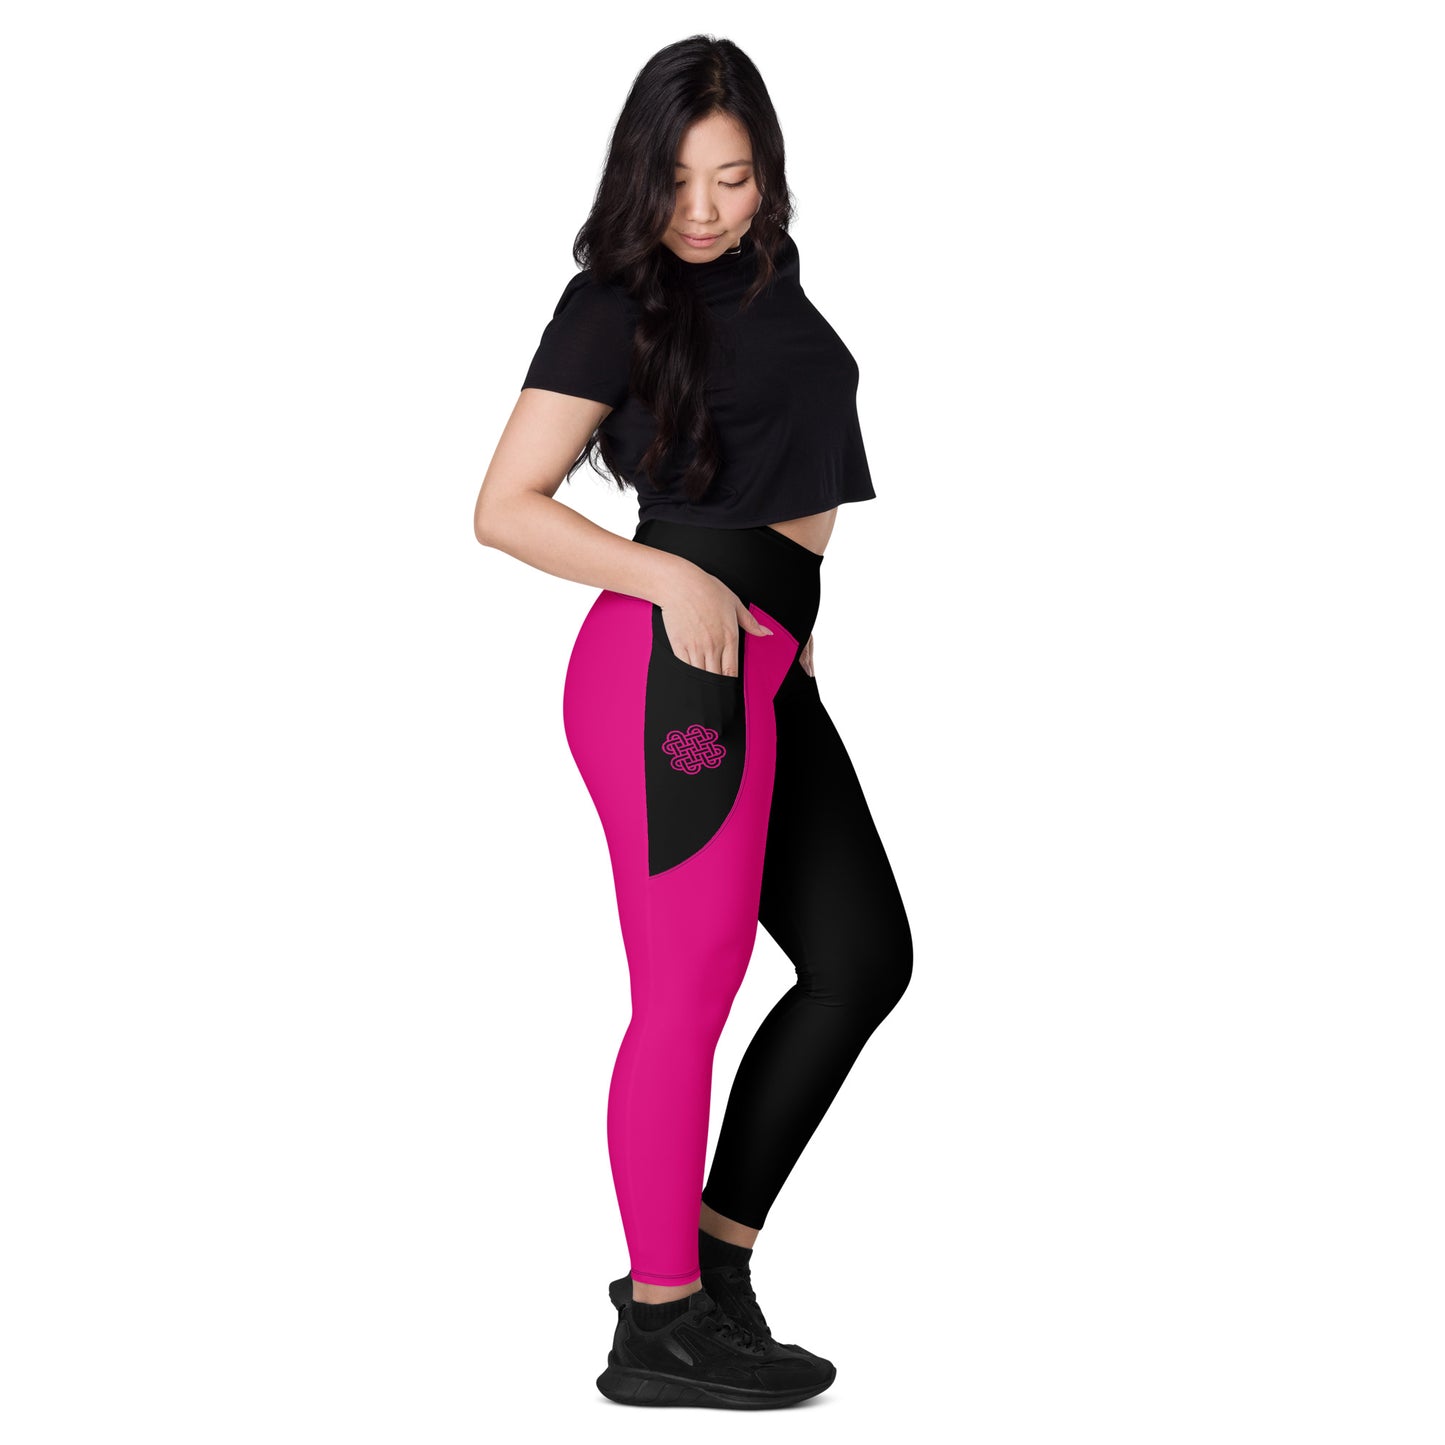 Shadows One leg Leggings with pockets Pink